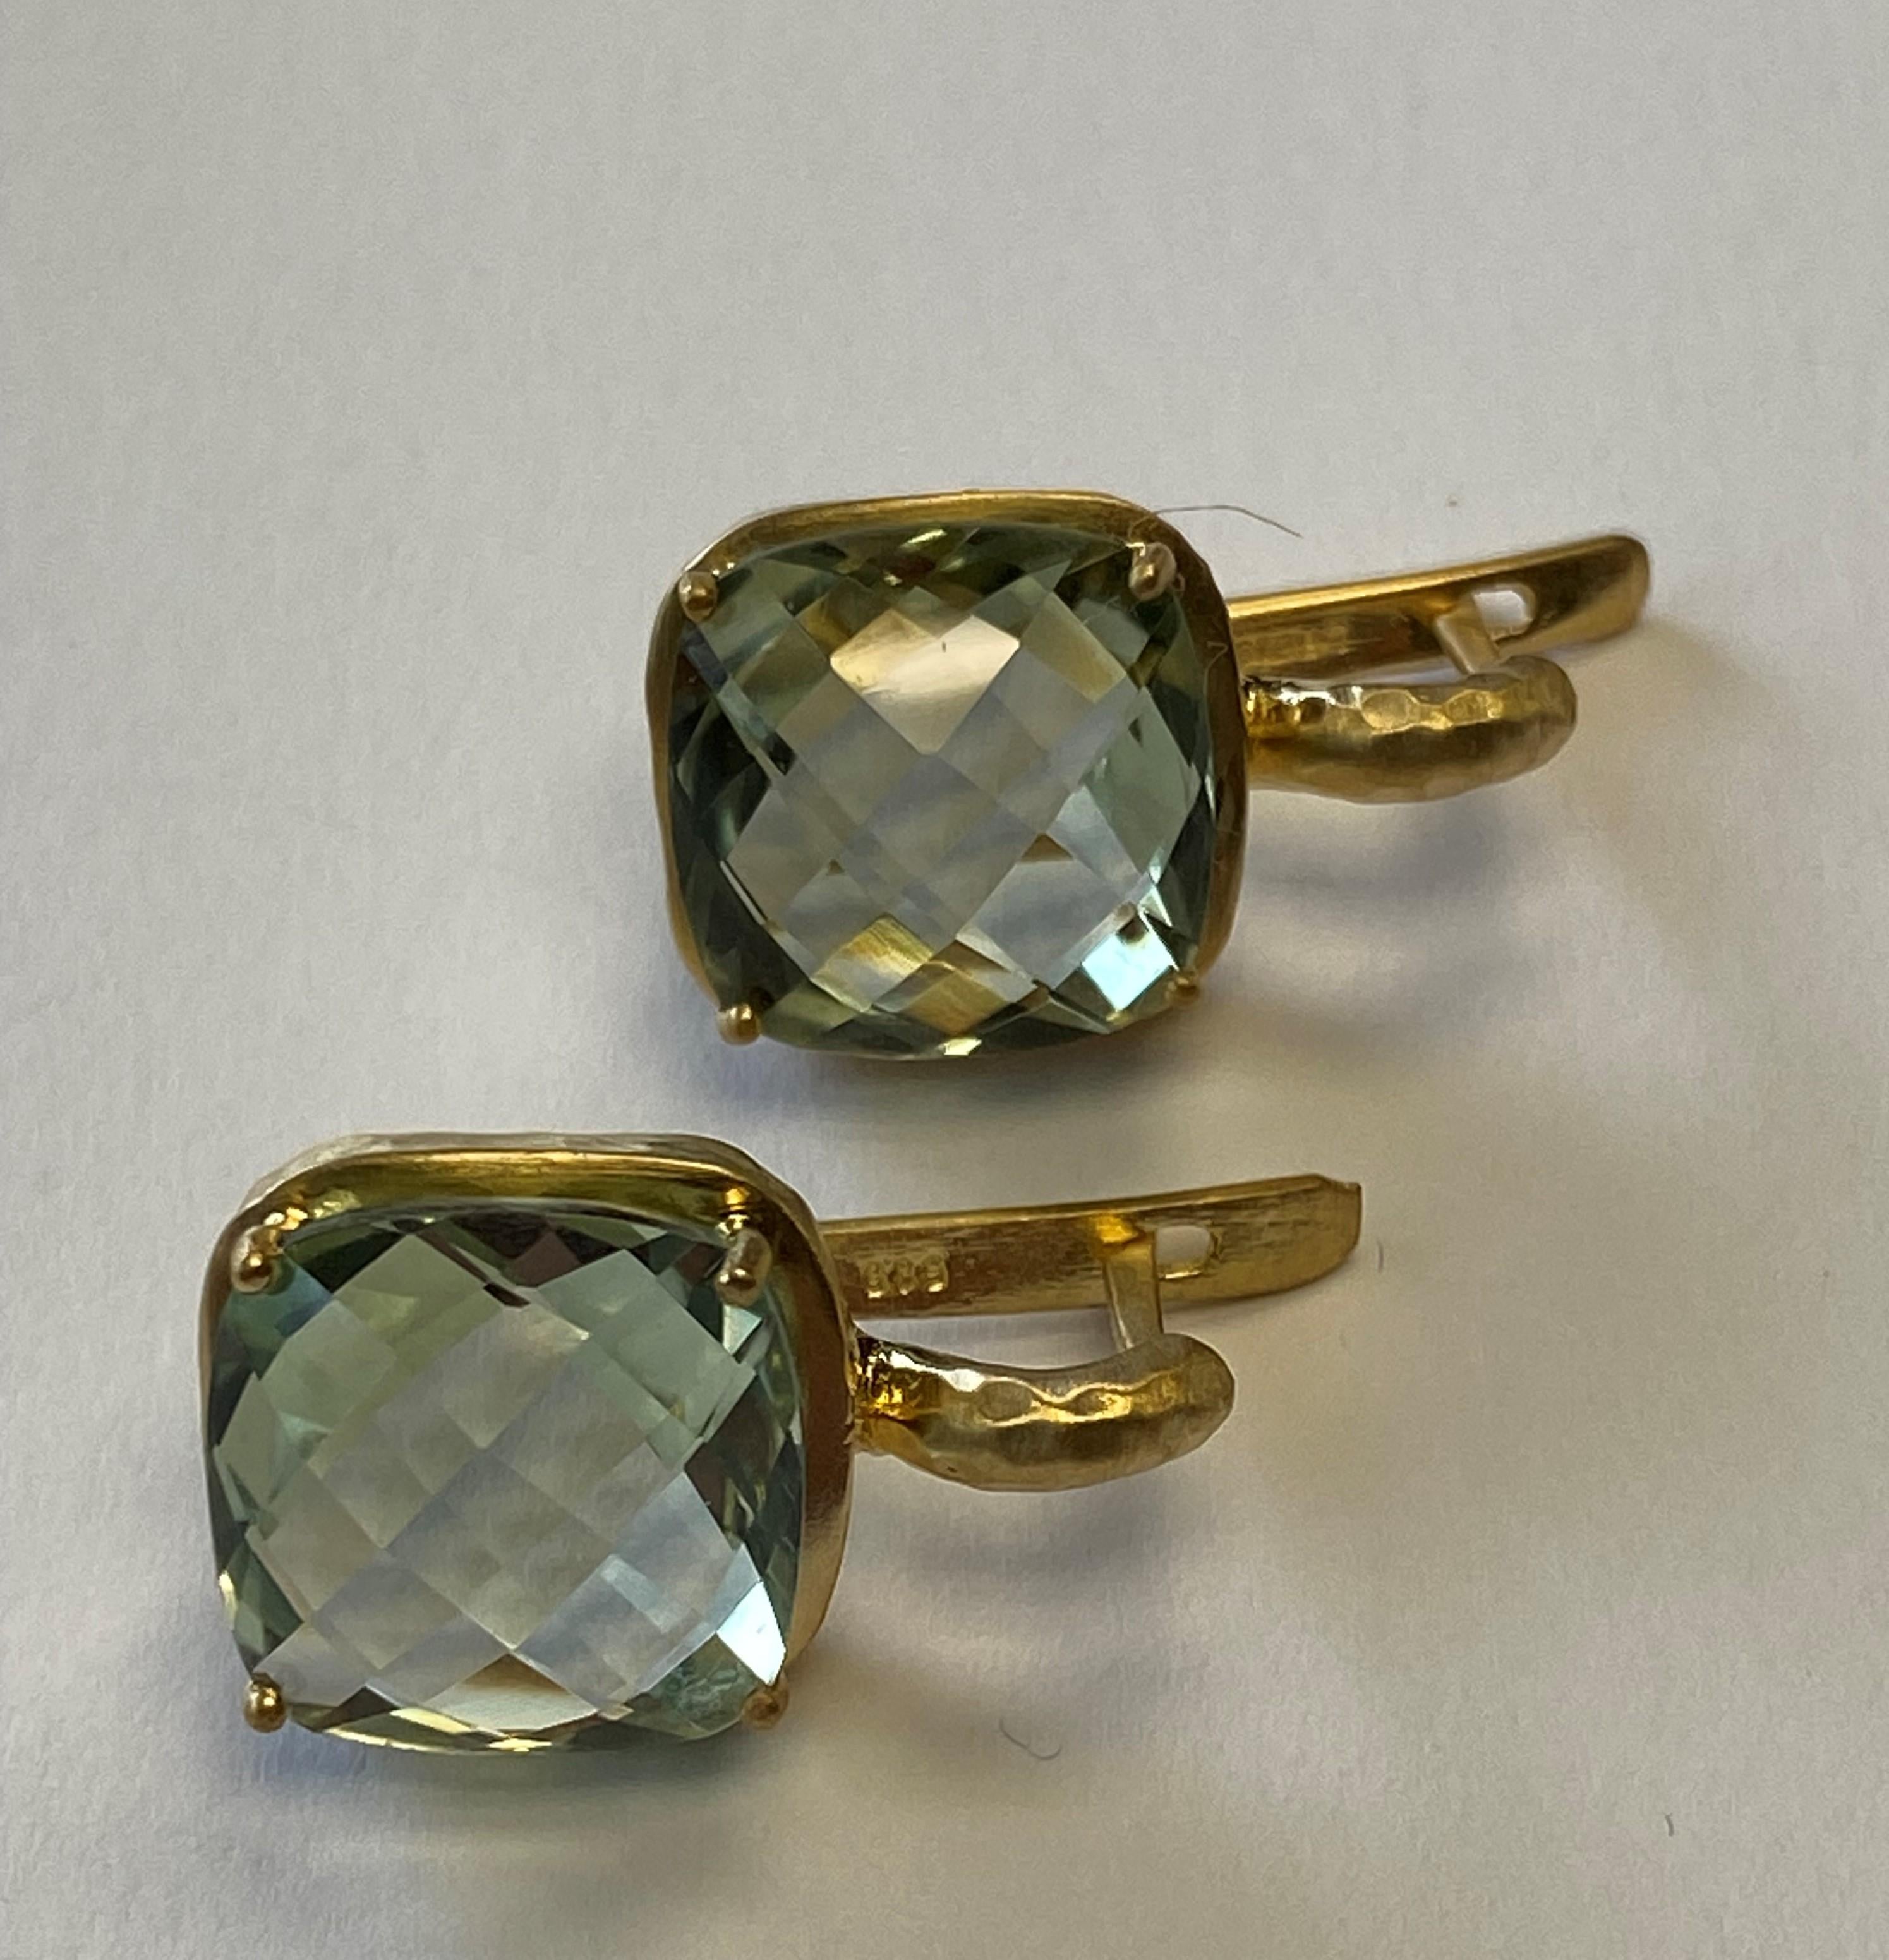 14 Karat Yellow Gold Matte and Hammer-Finished Drop Earrings, Centered with a 10mm 7.0CT Checkerboard Cushion-Cut Green Amethyst Semi-Precious Color Stone 
